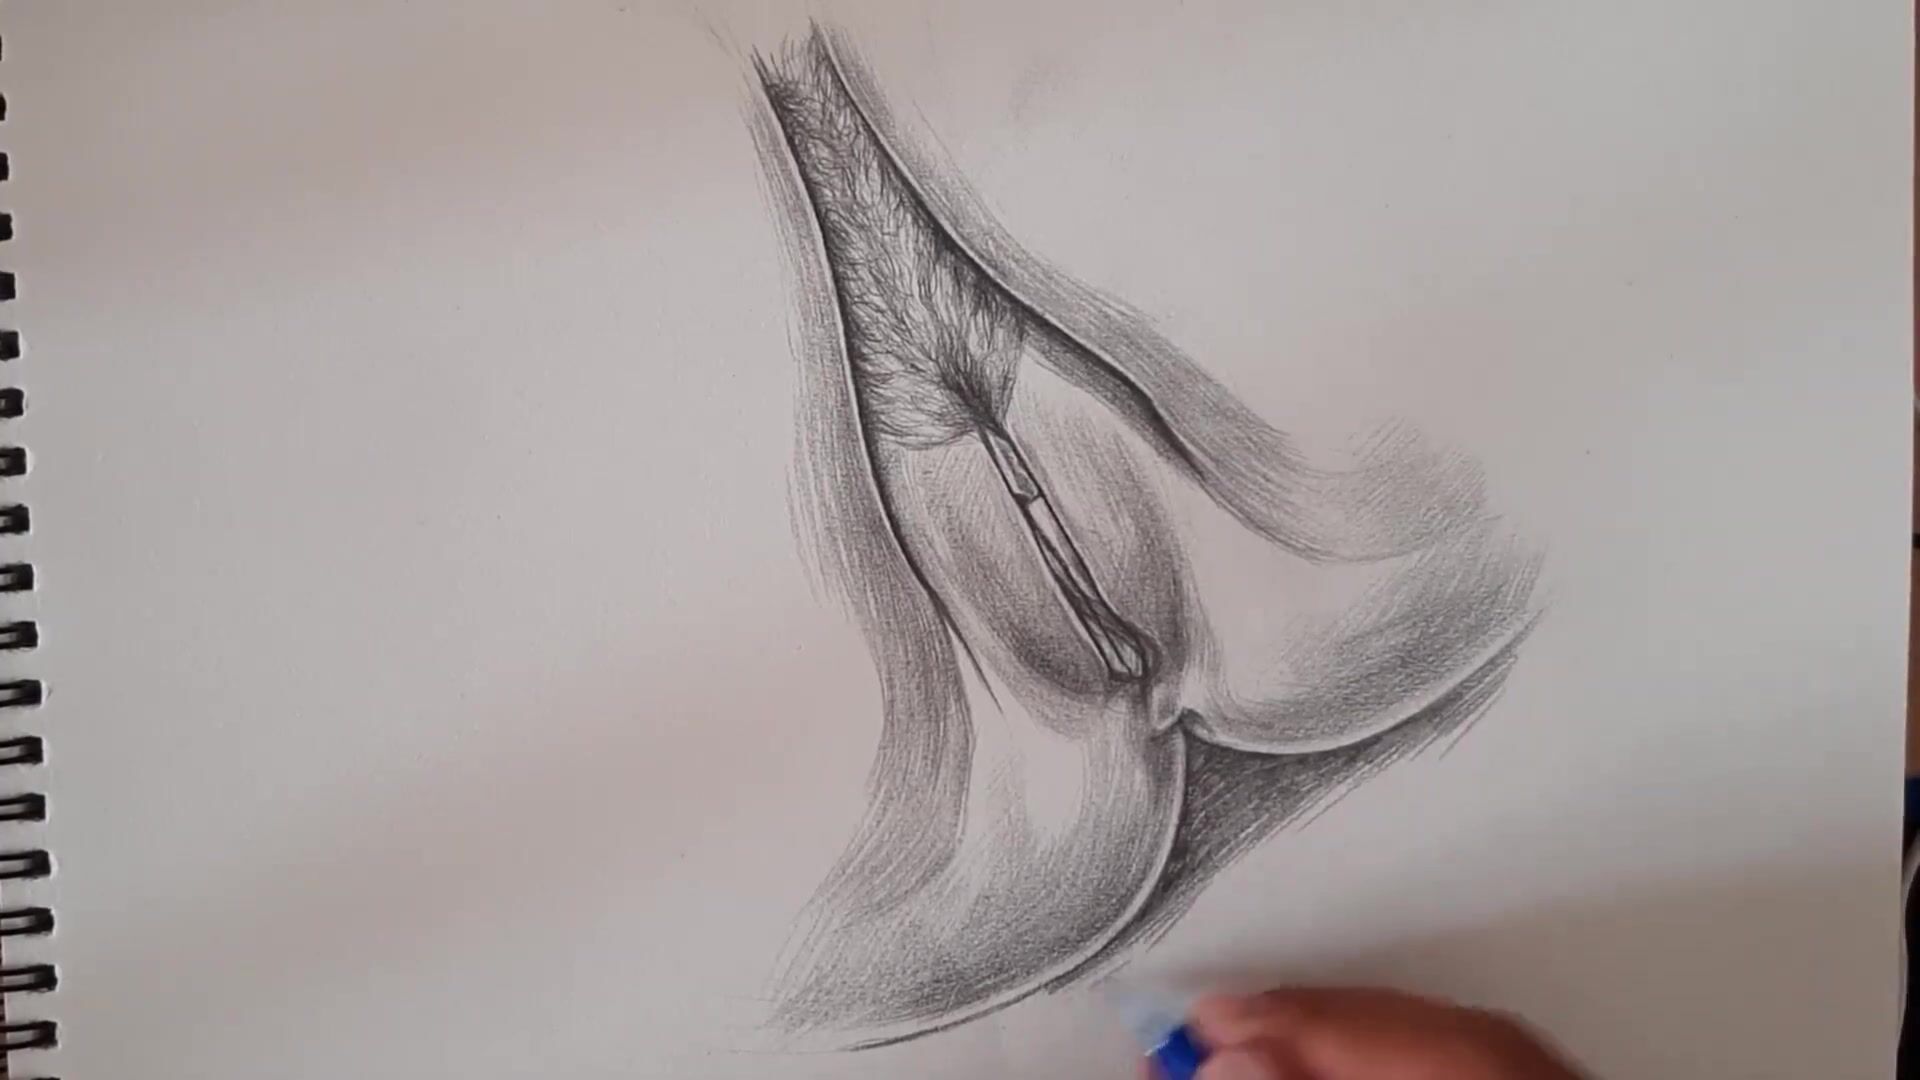 Bdsm women humiliation drawing pussy stretching